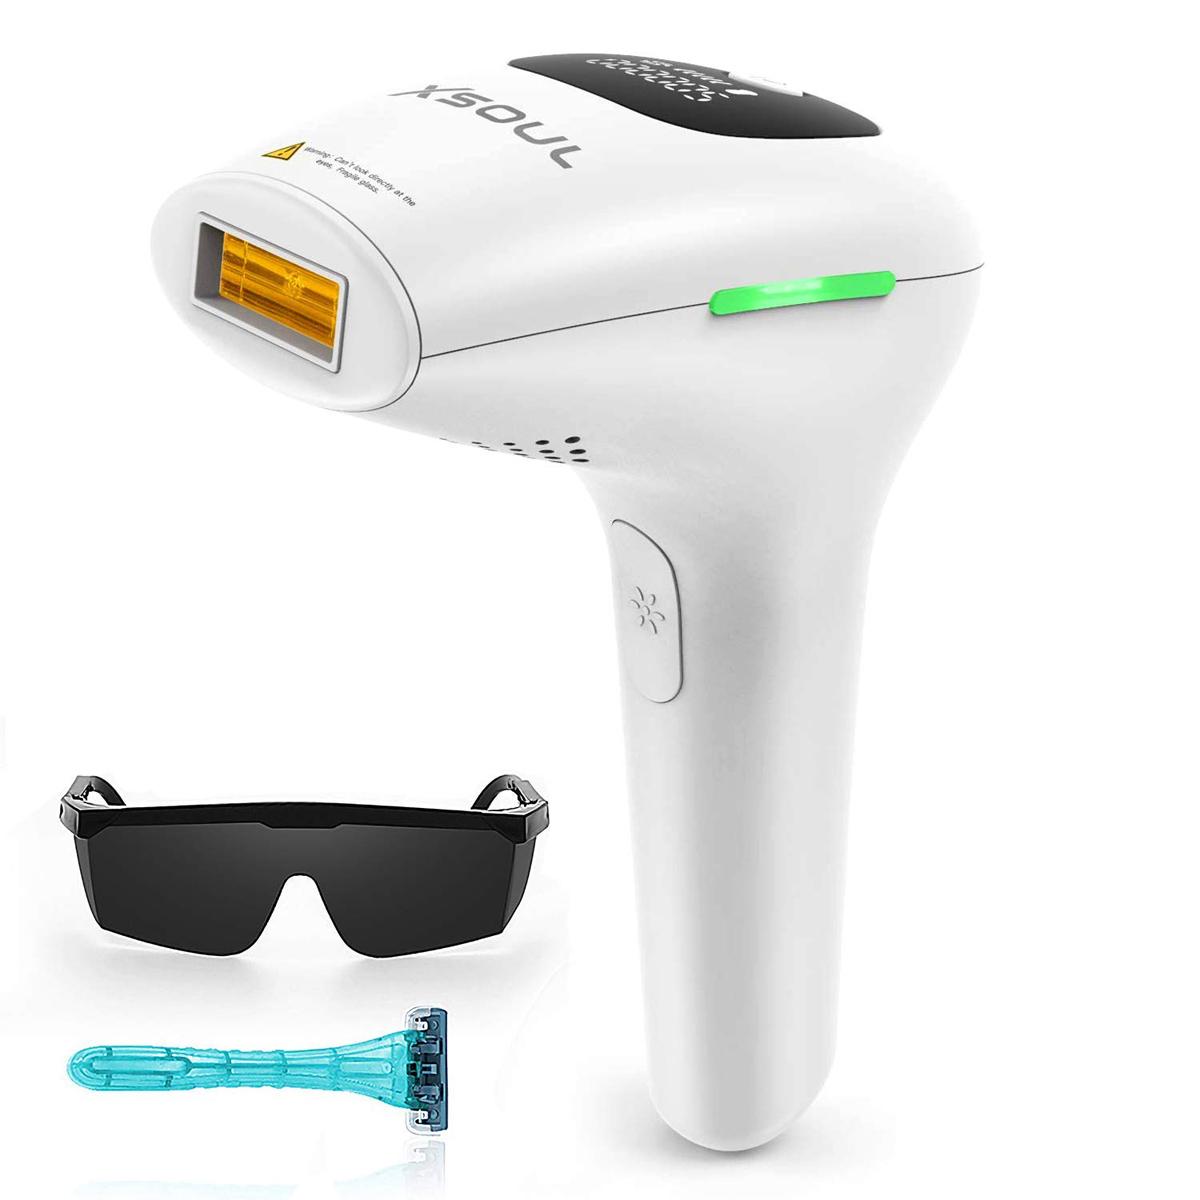 At-Home IPL Permanent Hair Removal Device for $69.99 Shipped